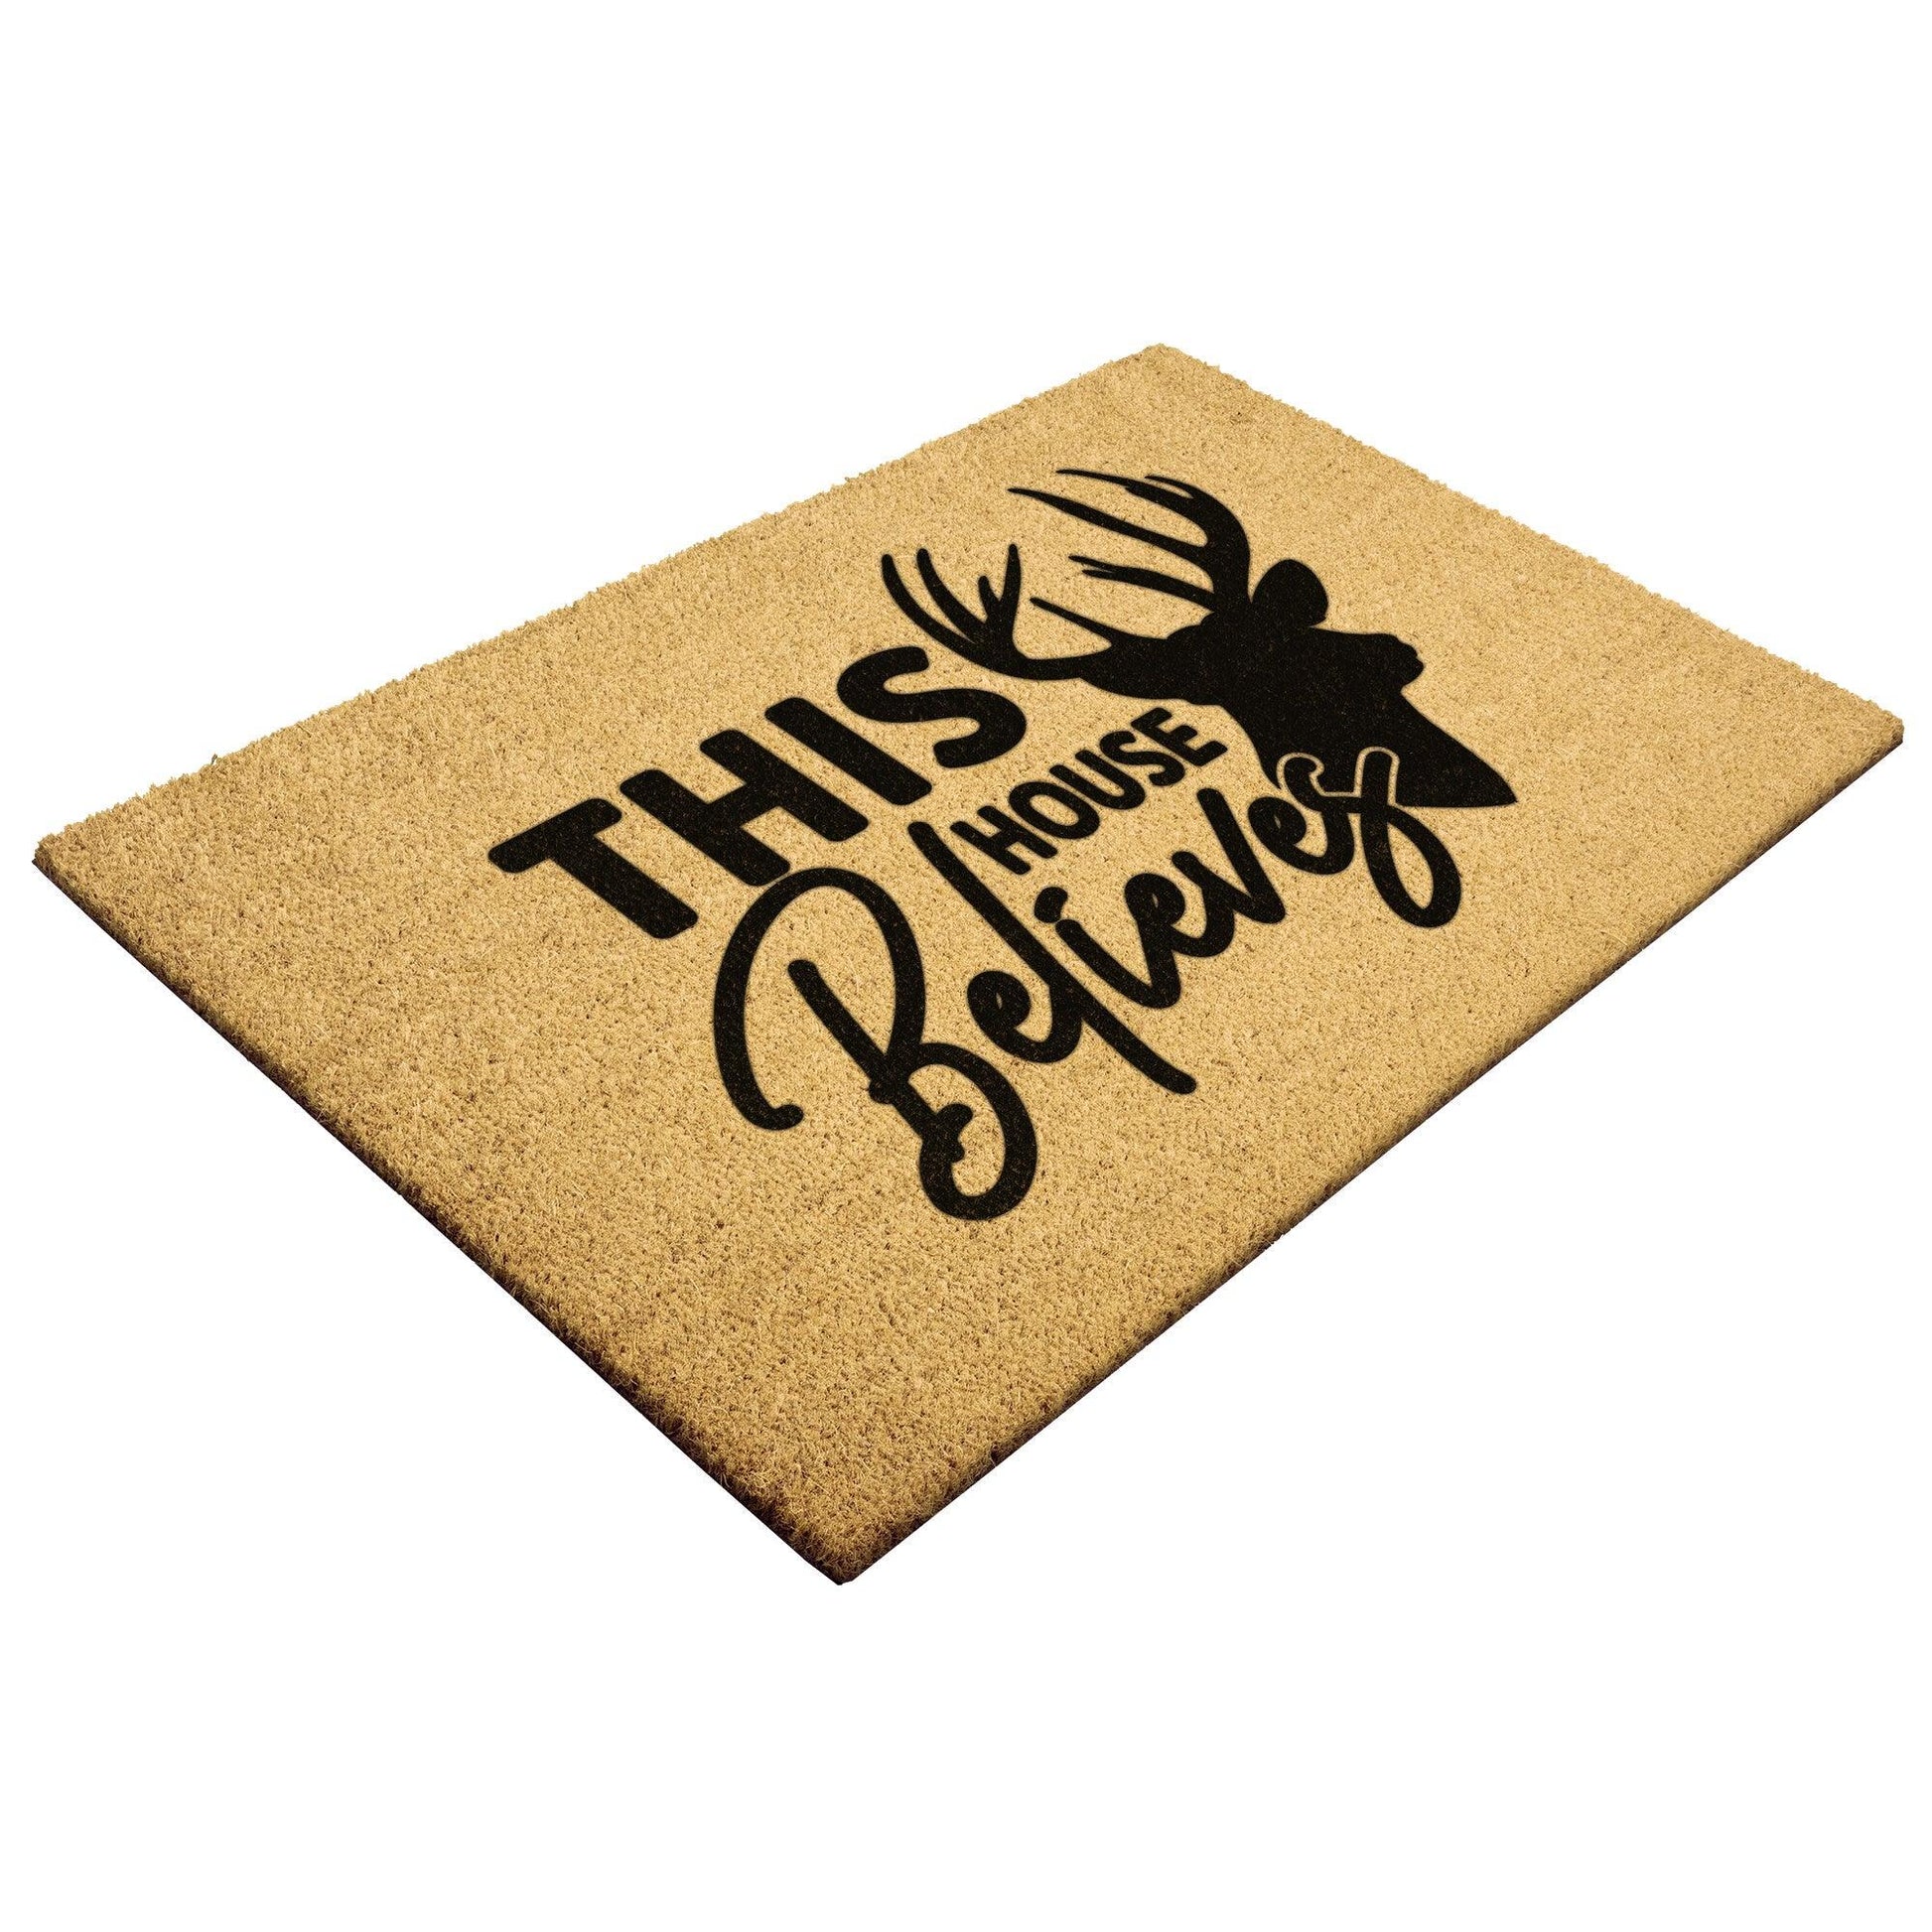 This House Believes in Christmas Outdoor Mat - Mallard Moon Gift Shop